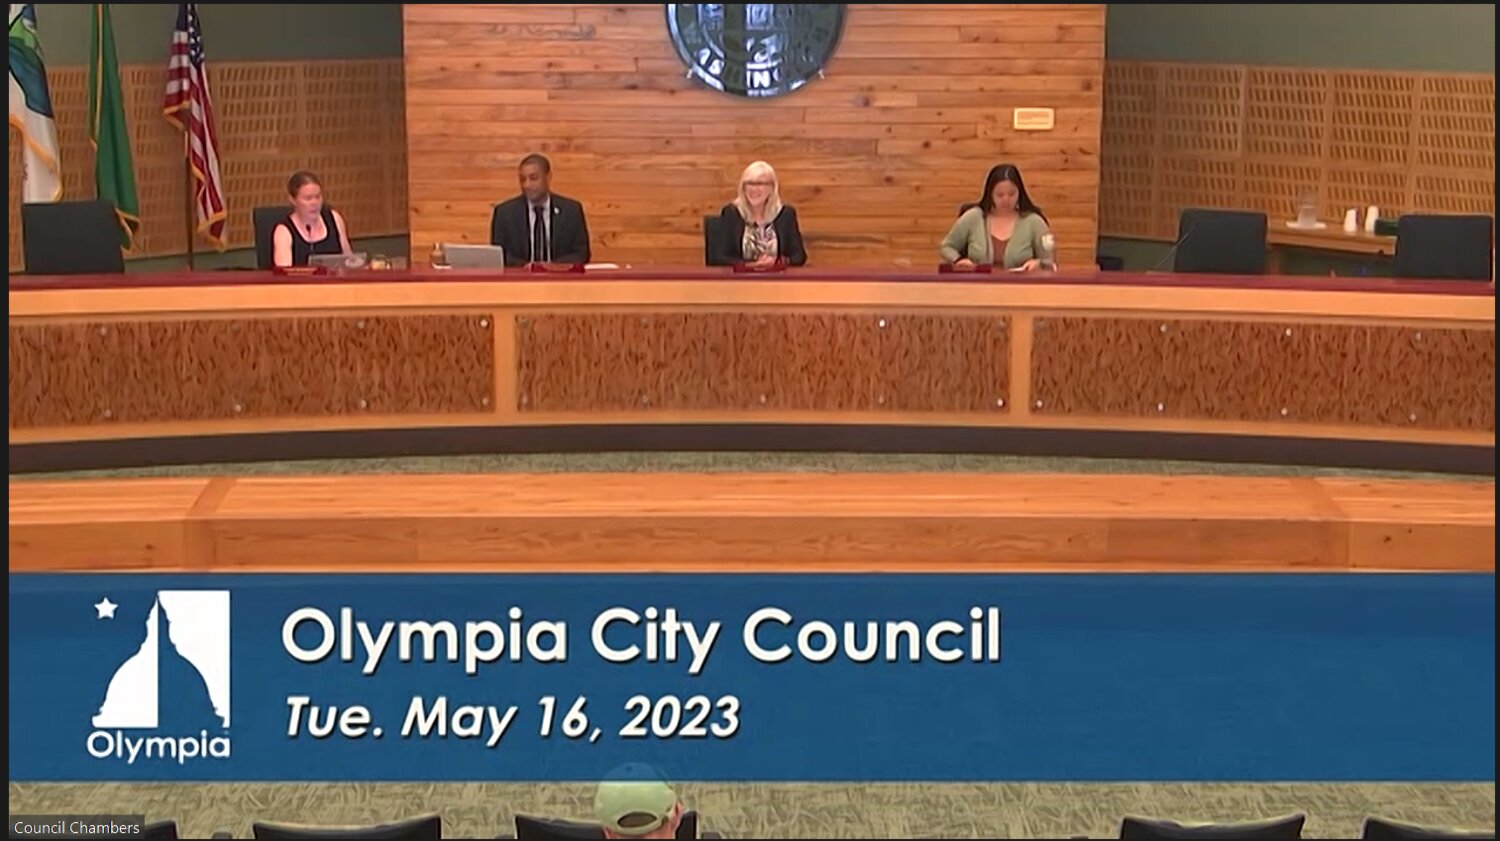 Olympia City Council approved giving $412,500 to fund struggling performance arts organizations in the city.